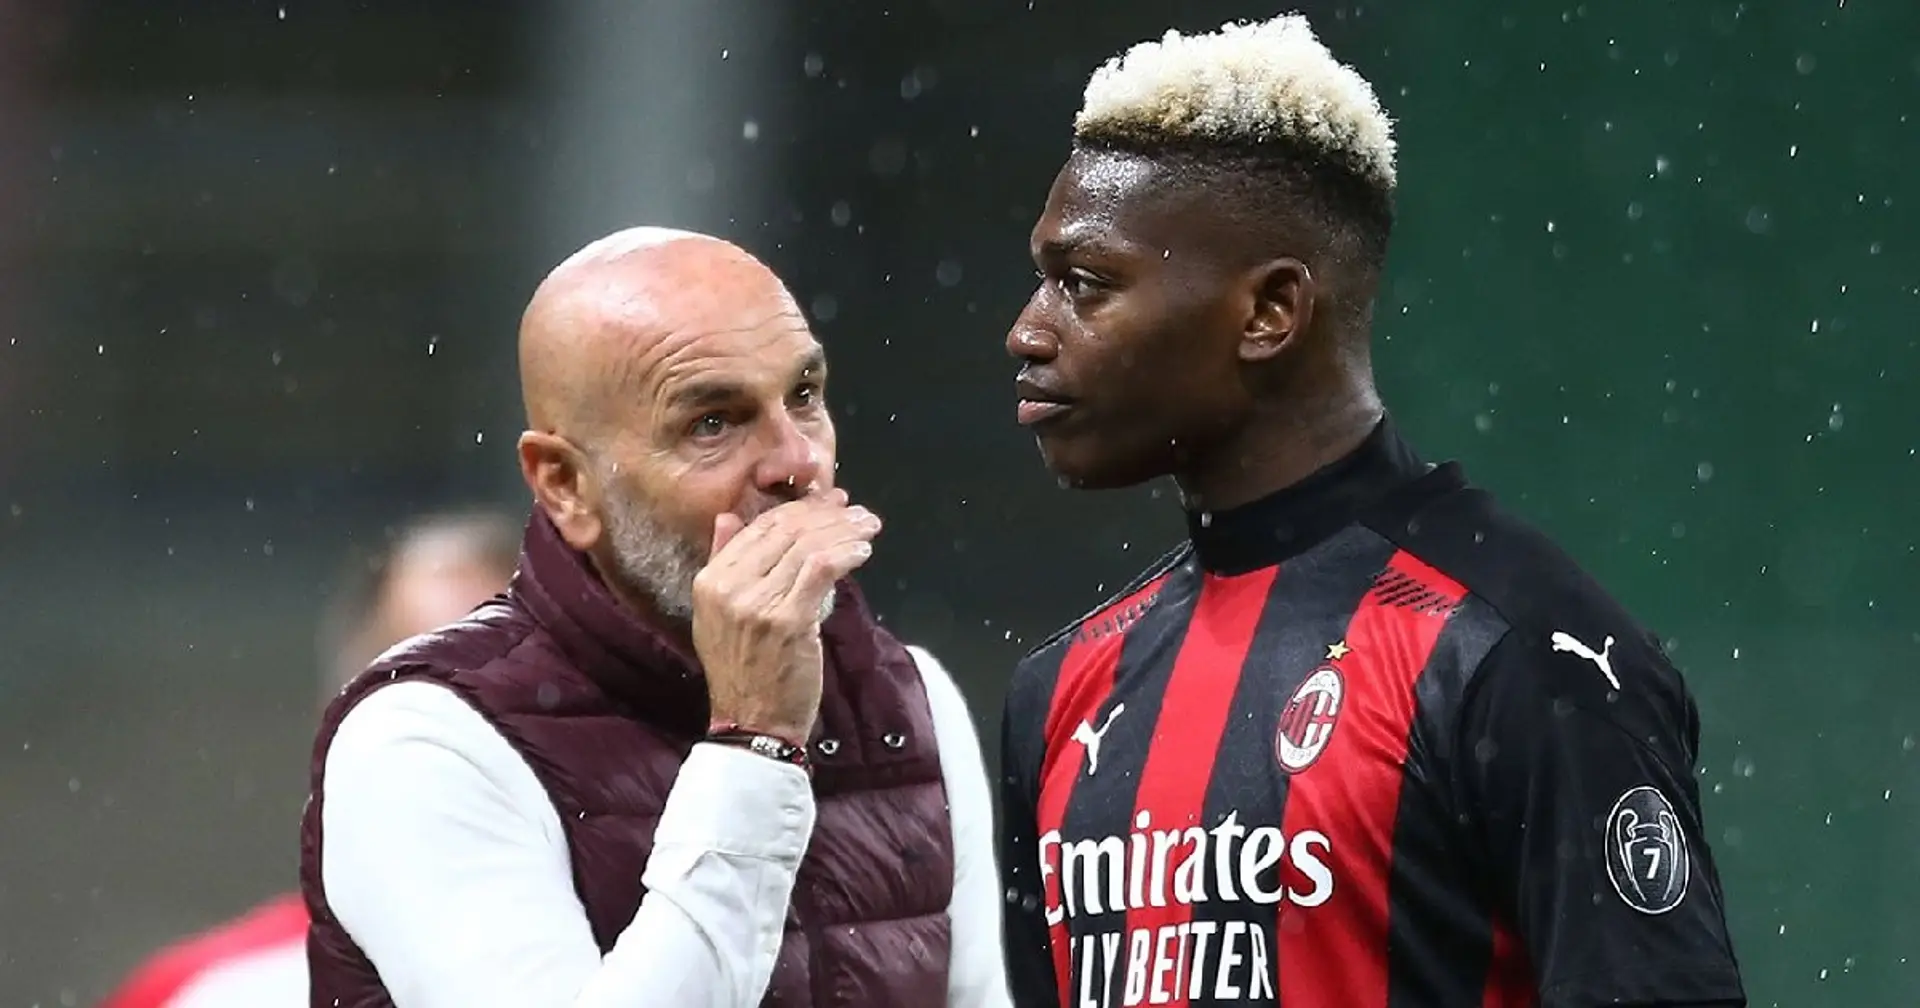 AC Milan manager Pioli reveals what he told Leao about his future amid Chelsea interest